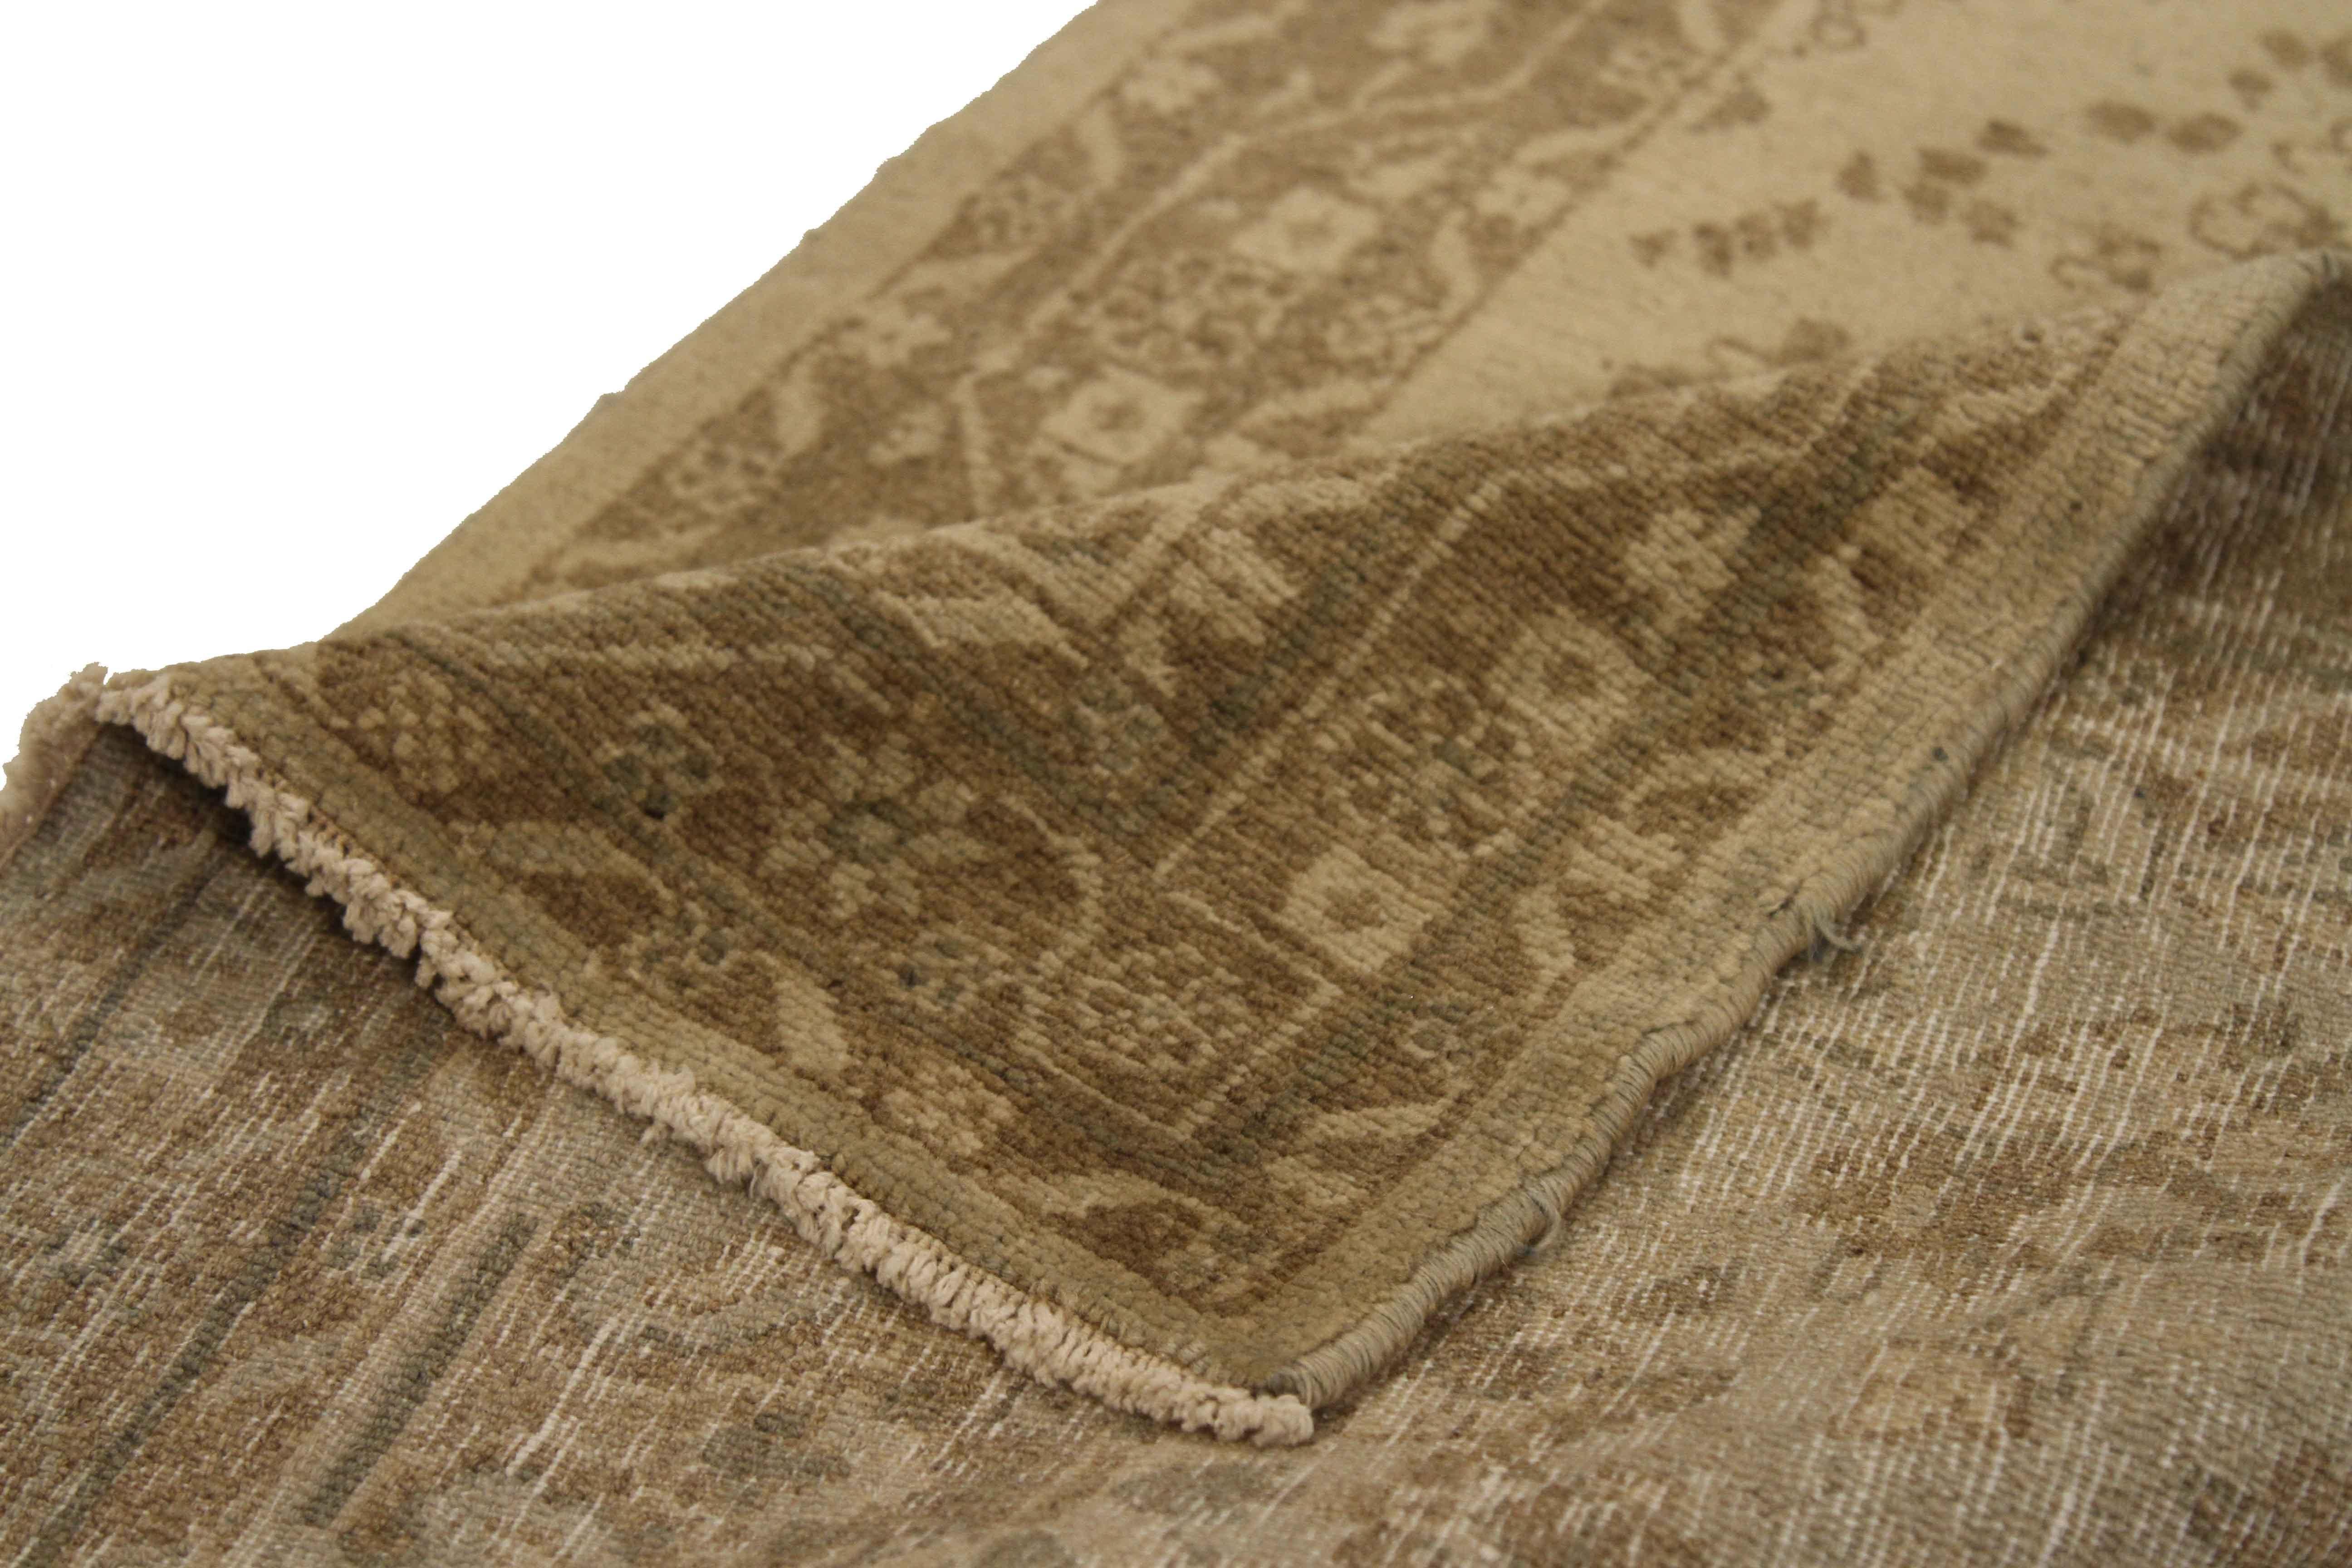 Antique Persian rug handwoven from high-quality organic wool with its exquisite surface covered with design patterns traditionally found in Hamadan carpets. It’s colored in gold, ivory, and green made from natural vegetable dye. It’s a nice option